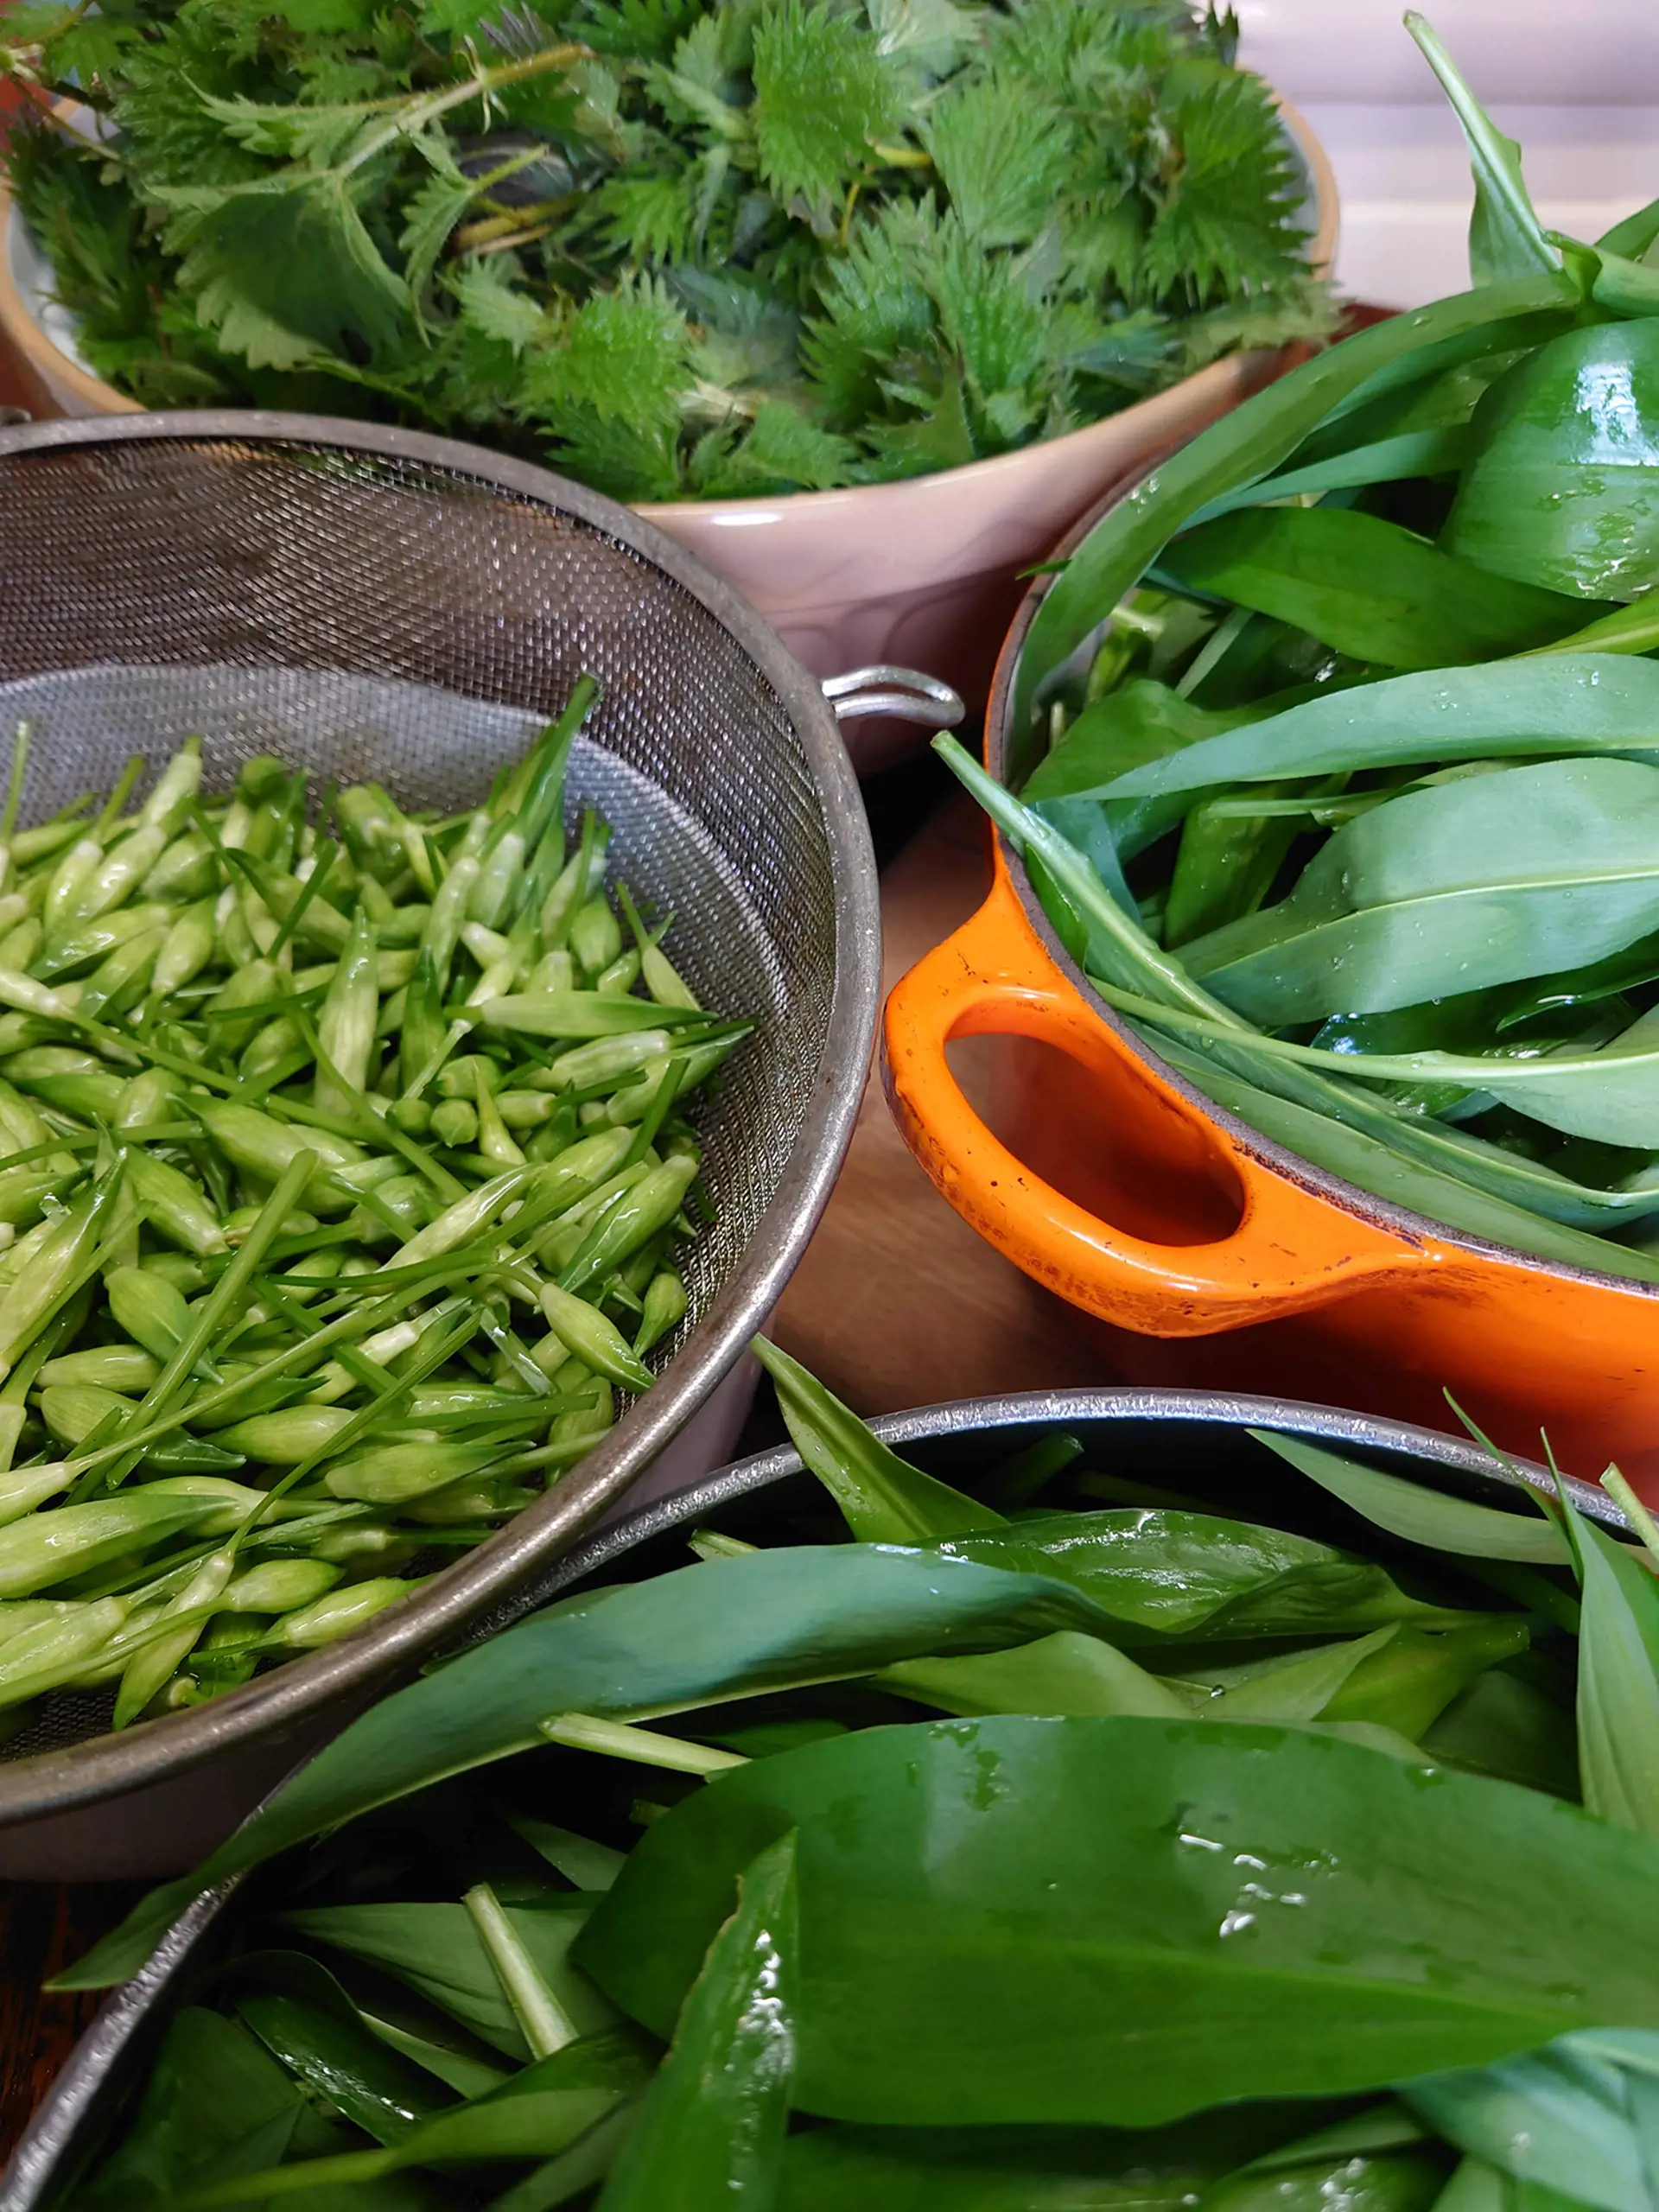 heathery_heights_assembling_wild_garlic_and_nettles_for_pesto_and_pickling_copy.jpg